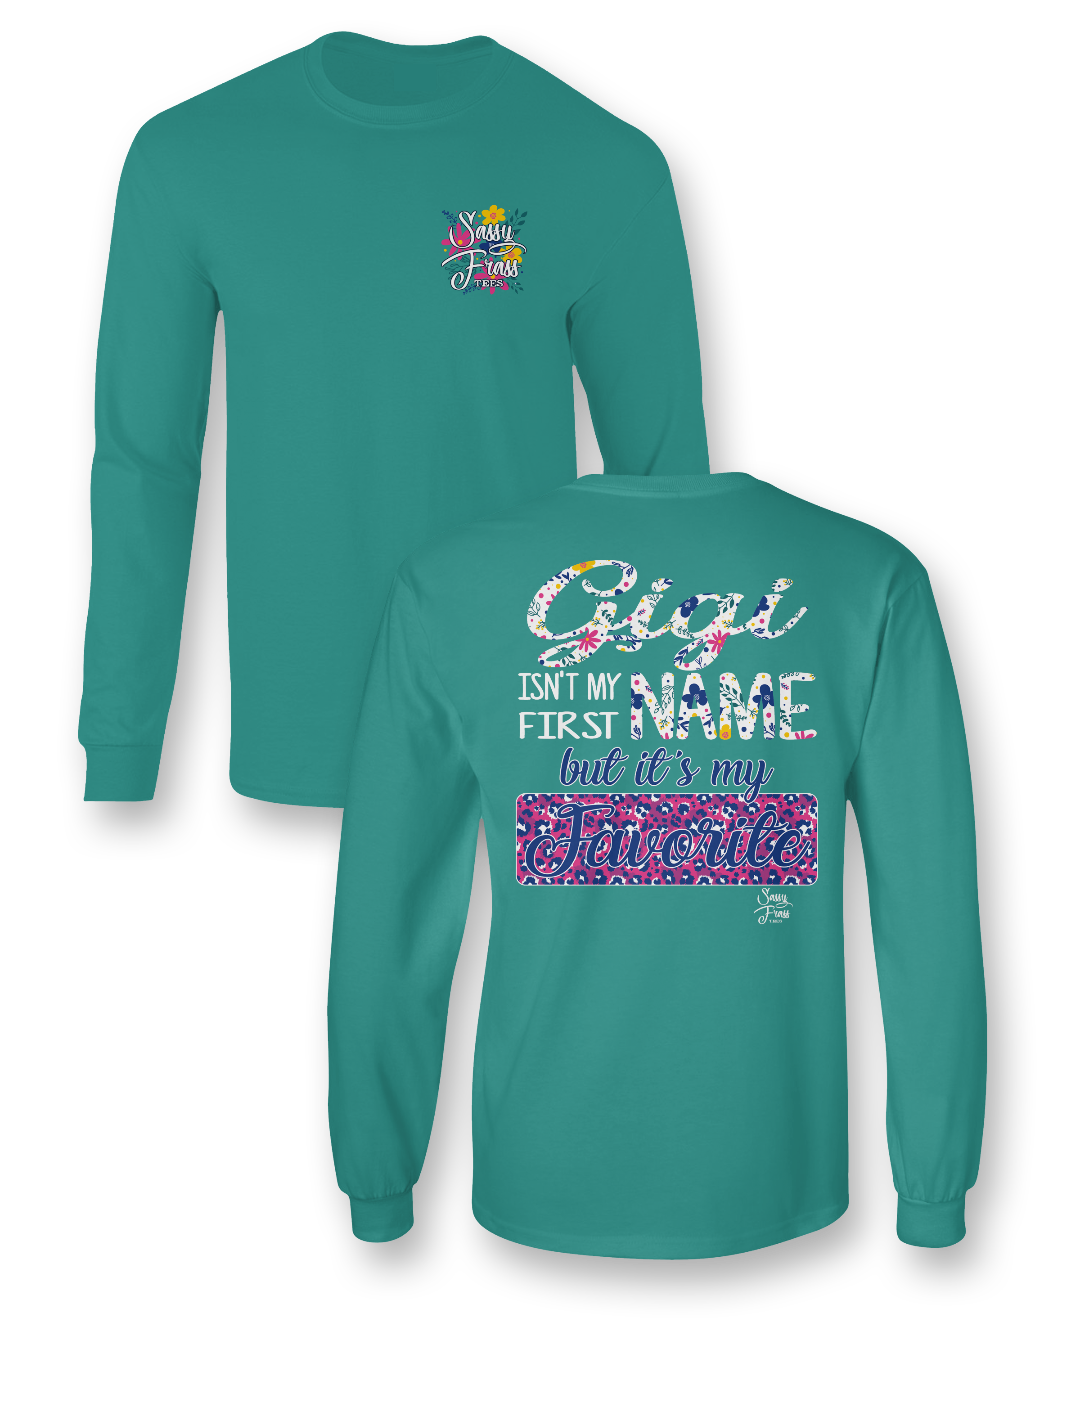 SALE Sassy Frass Gigi Isn't my First Name but it's my Favorite Long Sleeve Bright Girlie T Shirt